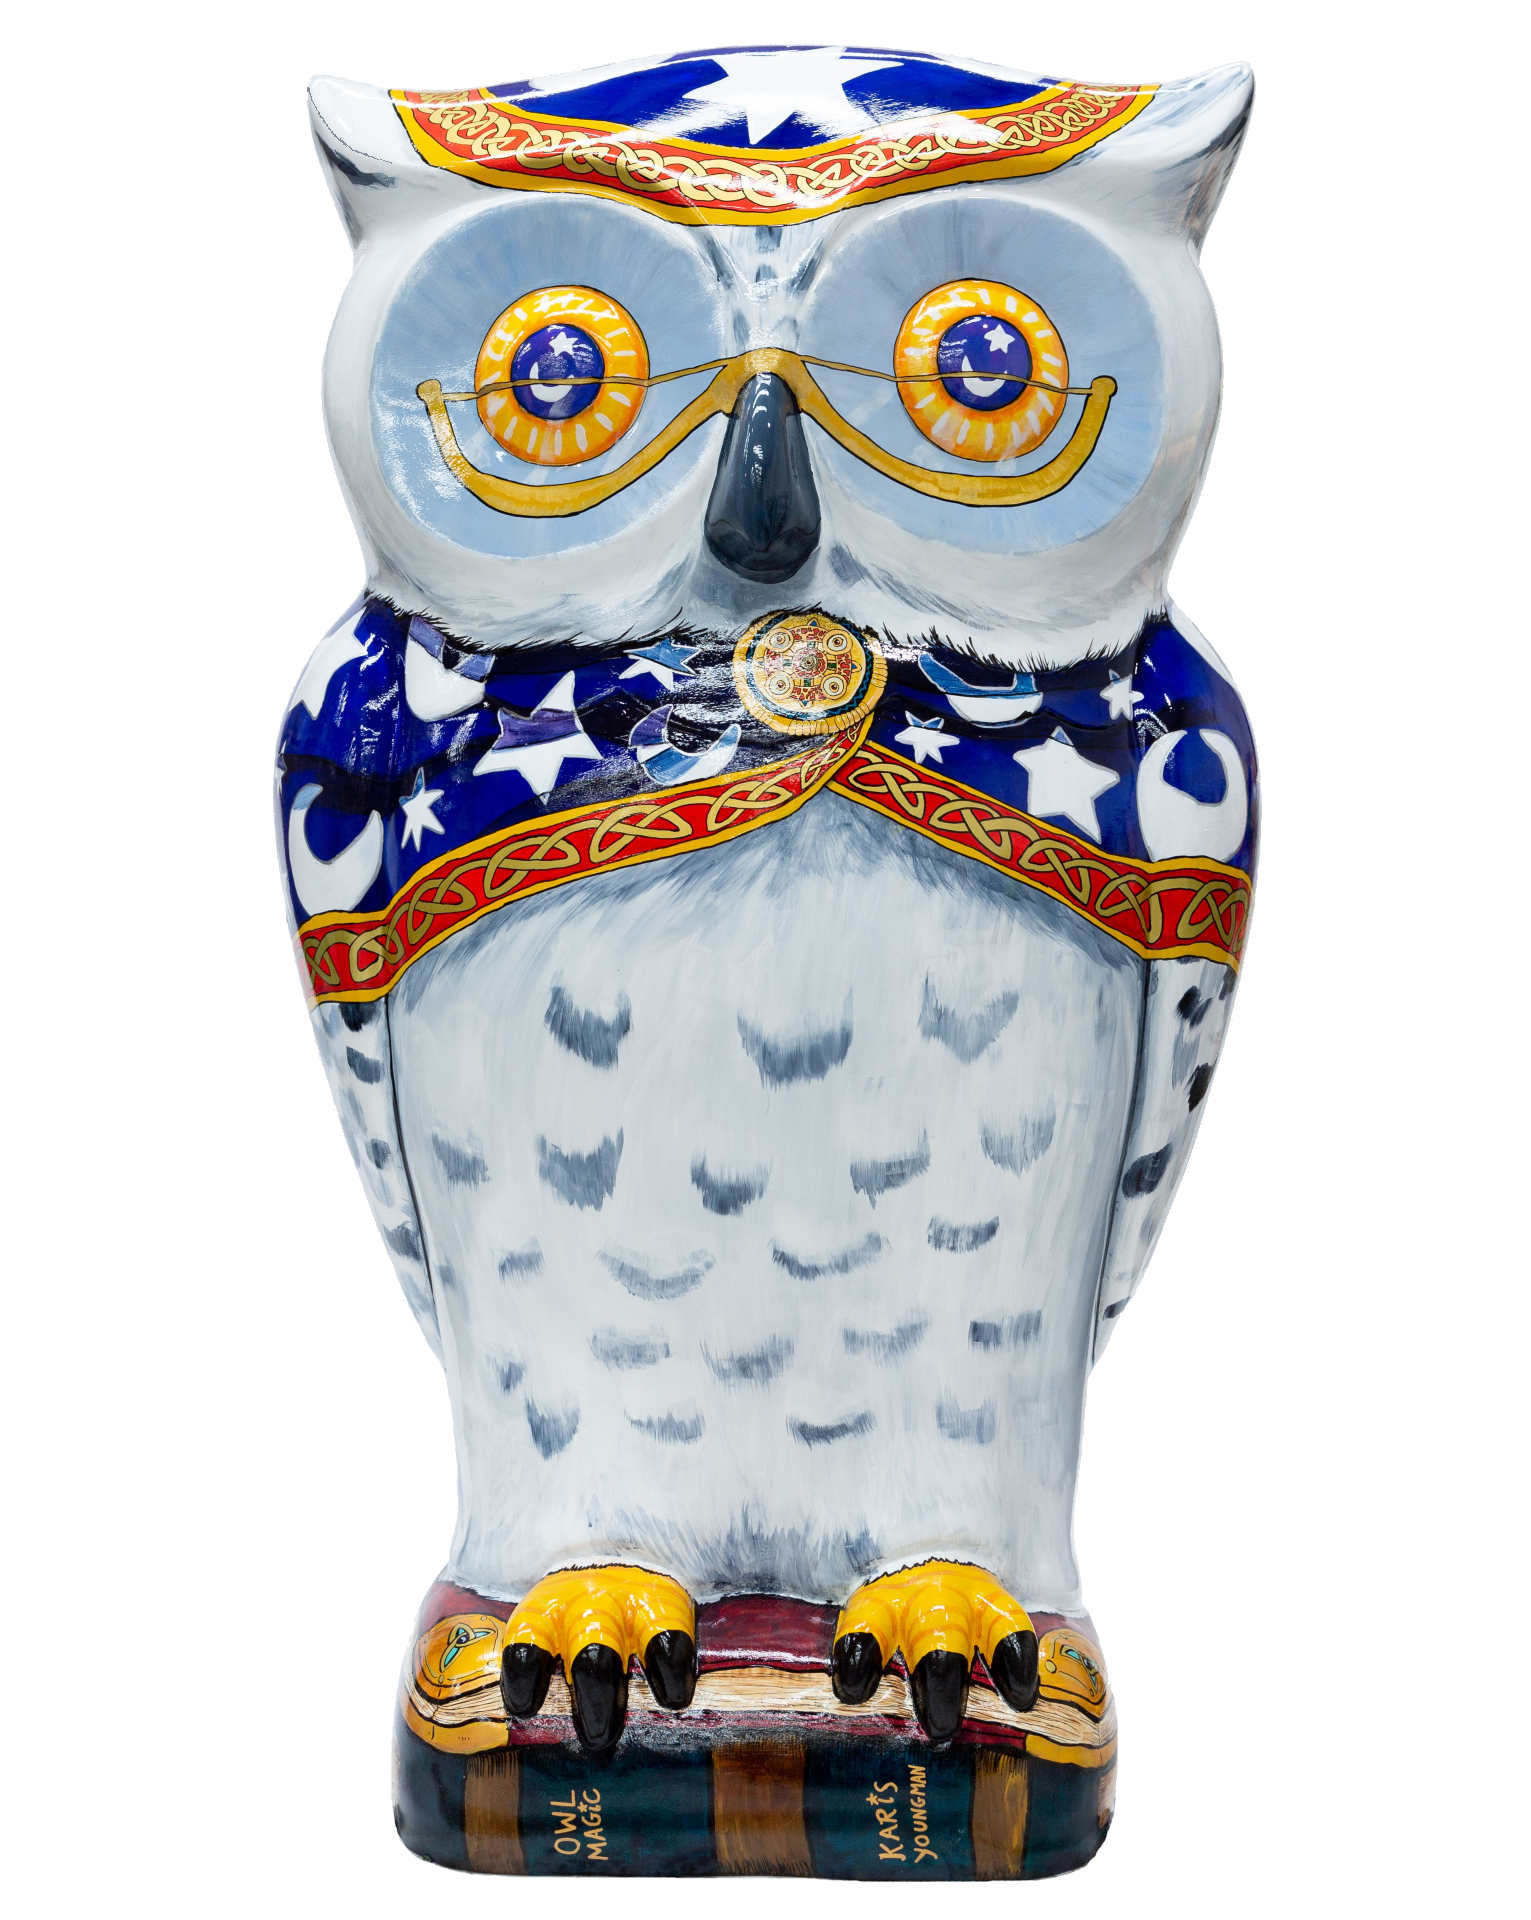 Merlyn The Chief Wiz-Owl by Karis Youngman. Sponsored by George Baker Group.